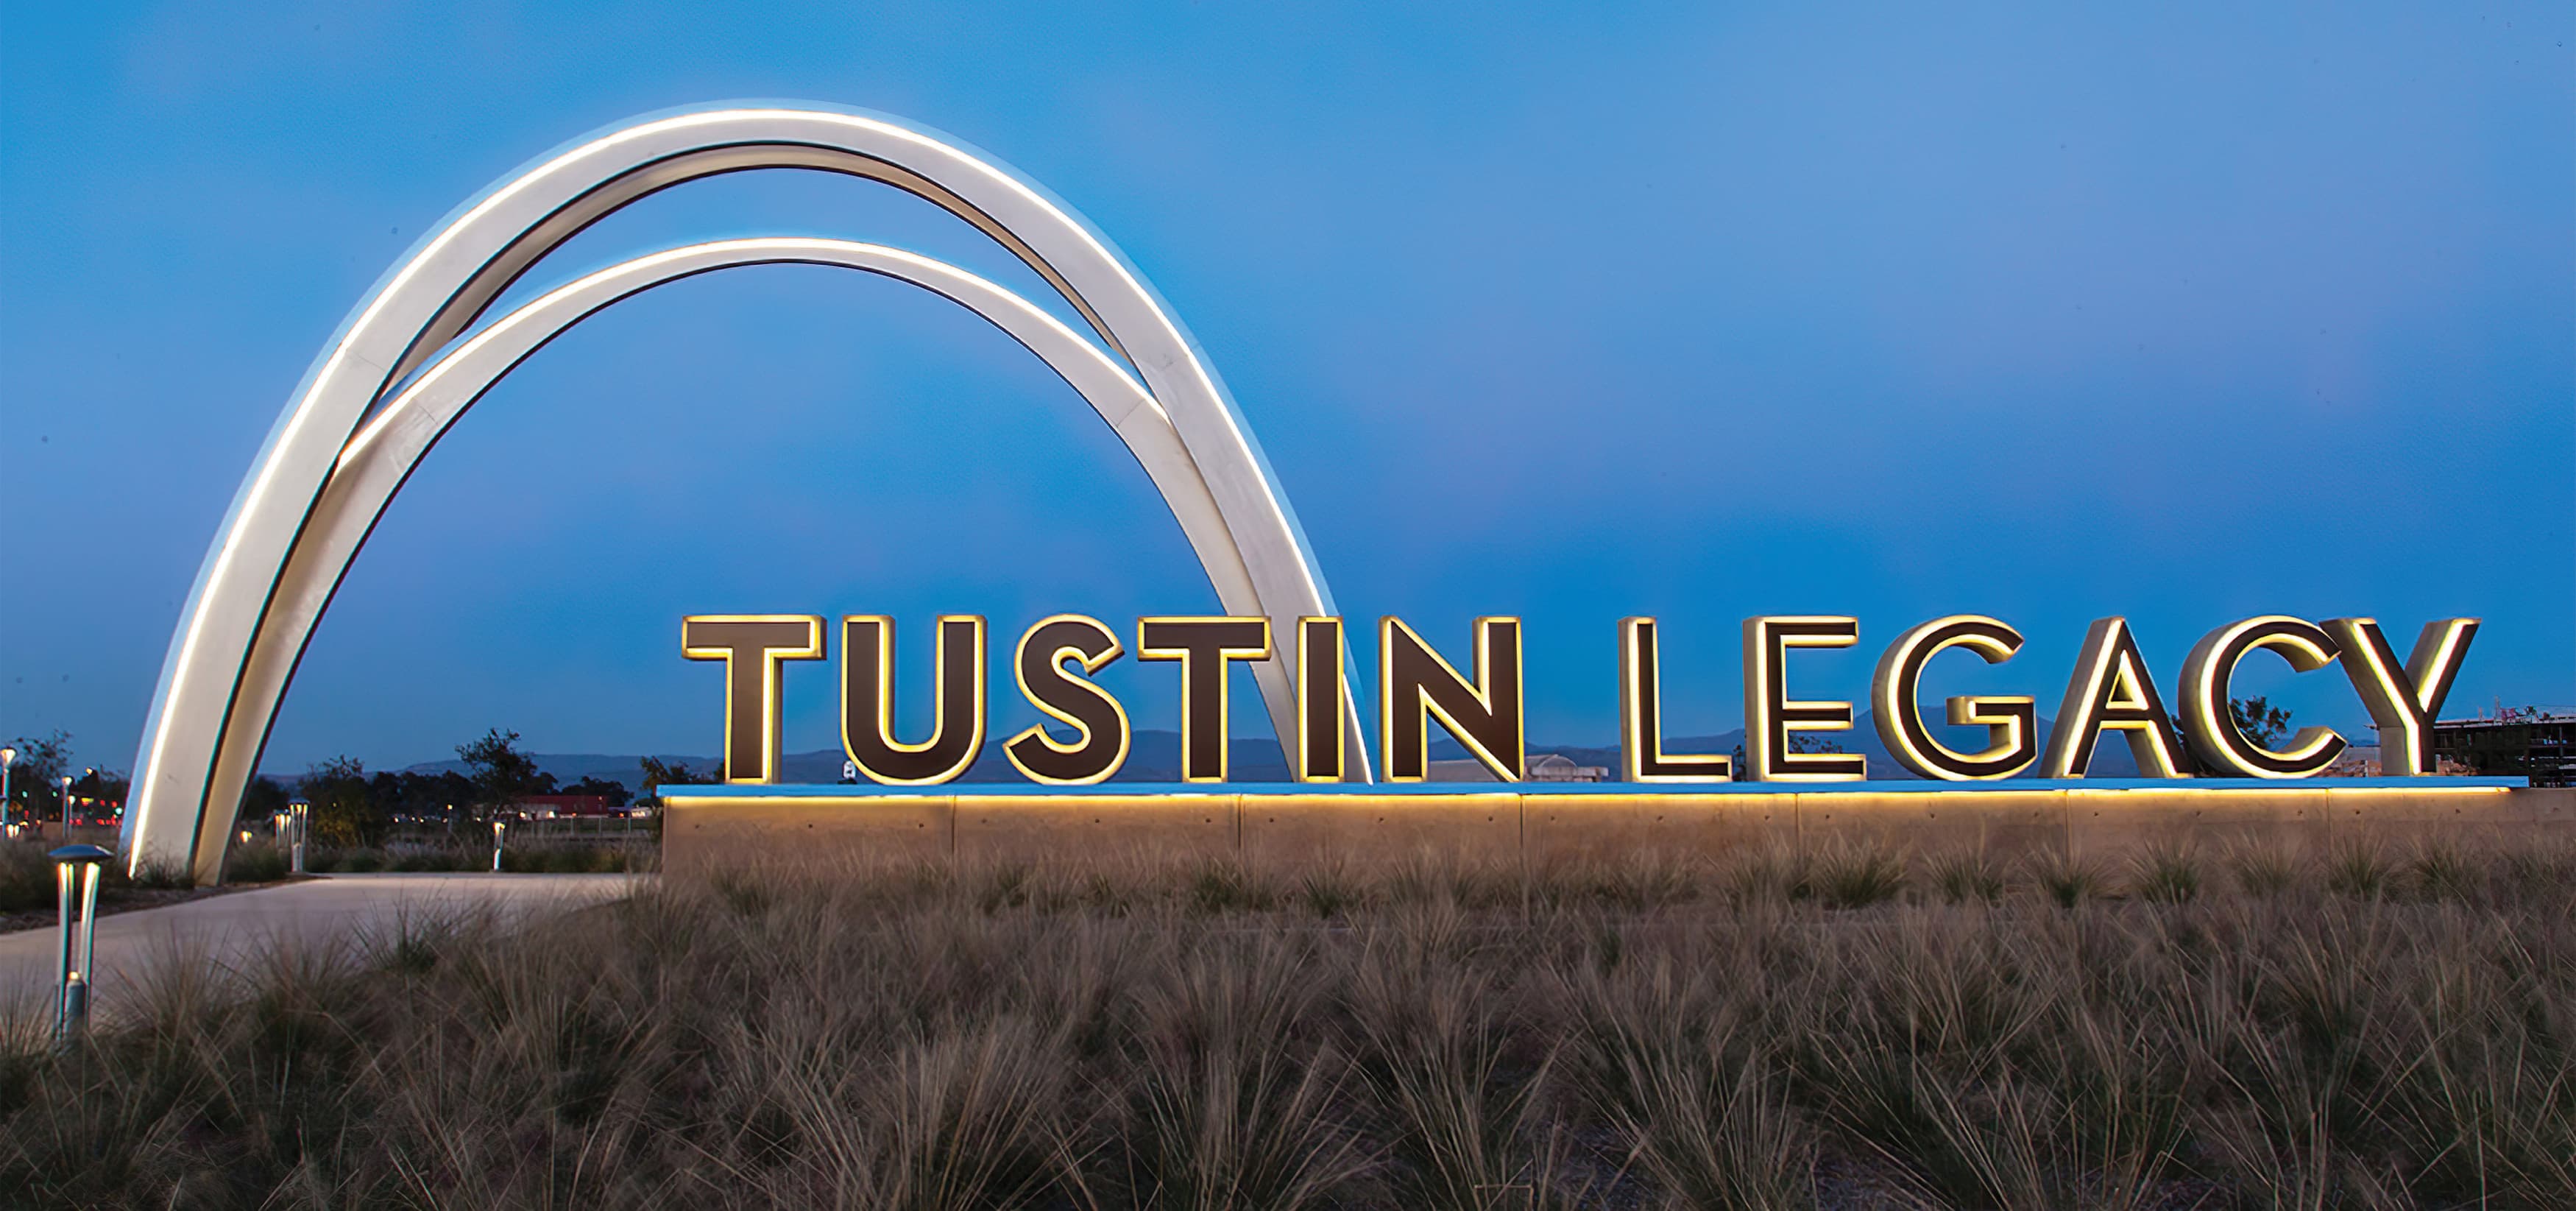 Tustin Legacy, a residential neighborhood in Tustin, California, Project Identity Monument with Iconic Arch